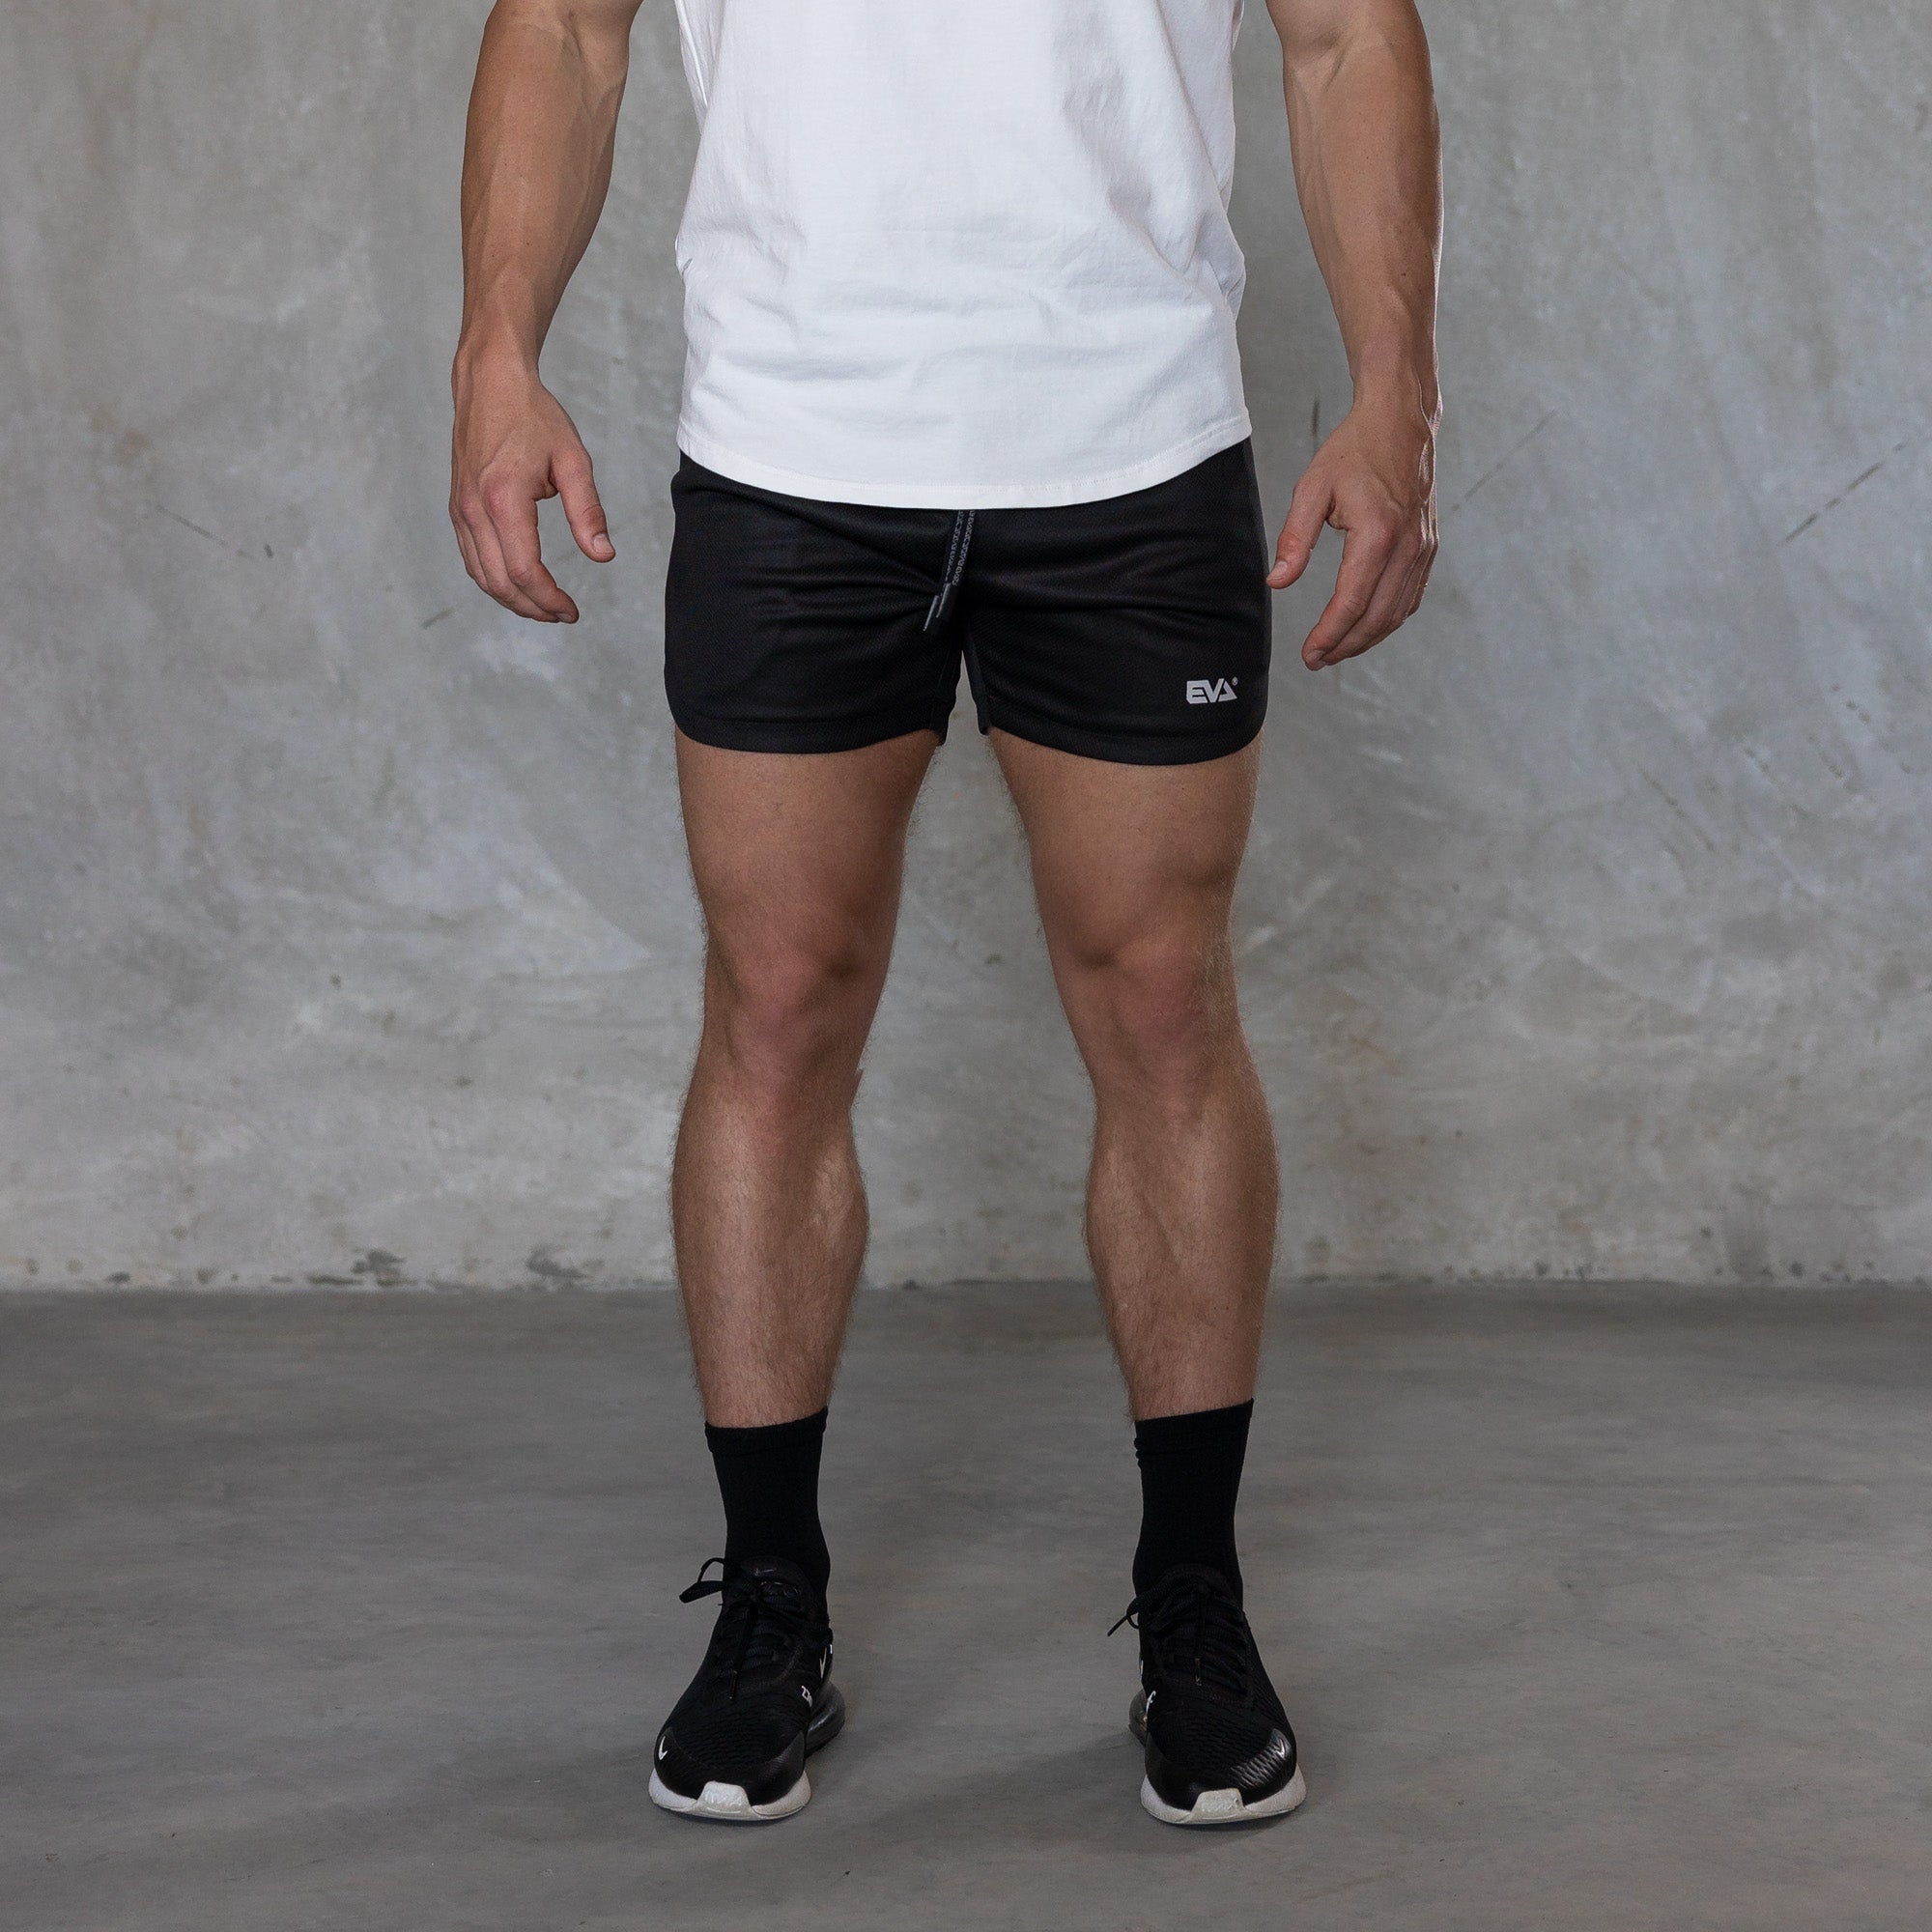 » MESH TRAINER SHORTS [BLACKOUT] (100% off)